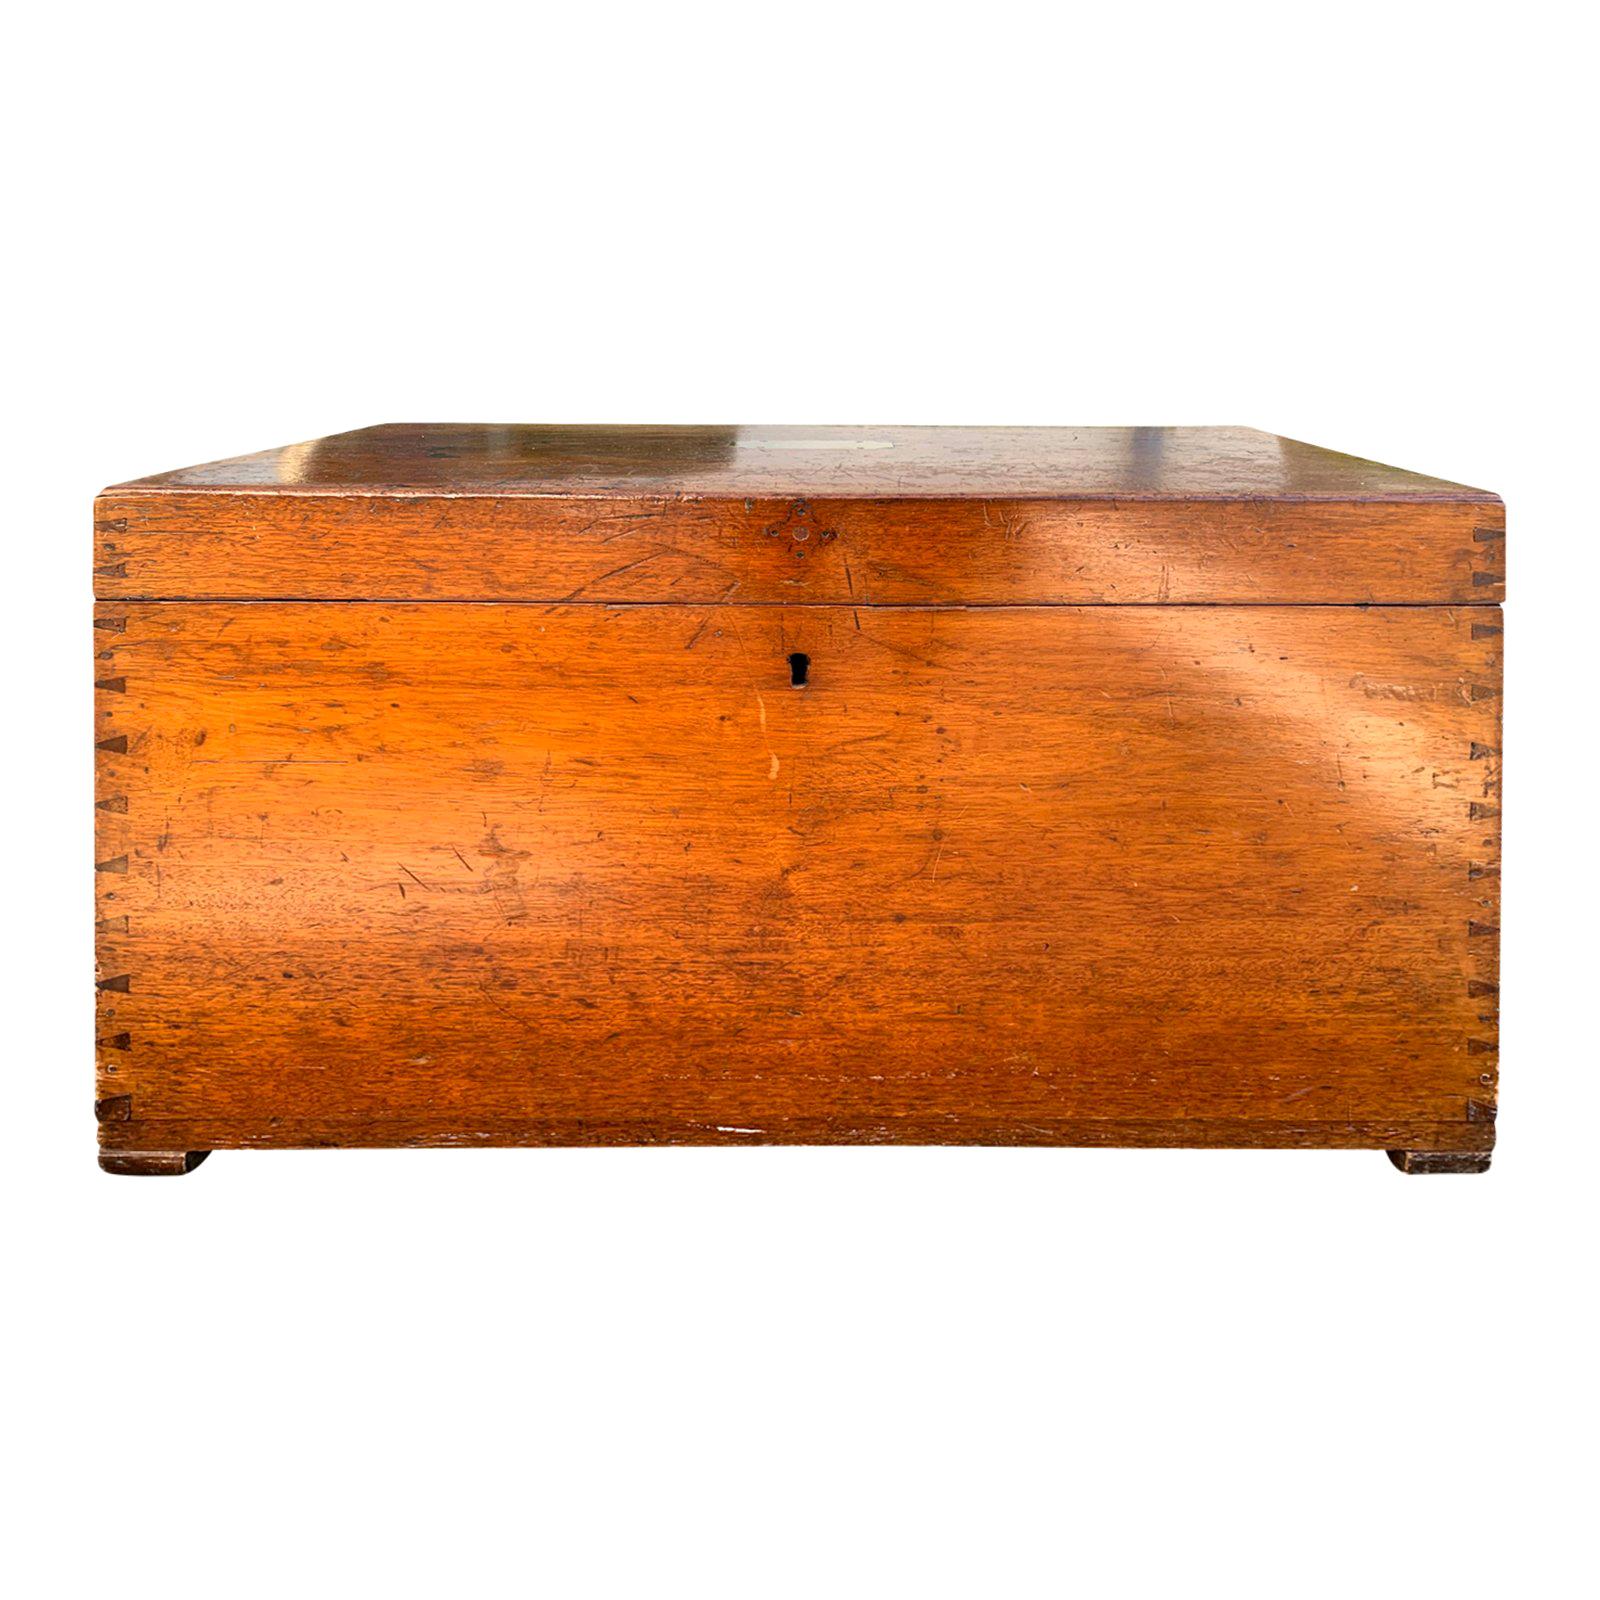 19th Century Camphor Wood Sea Captain's Trunk with Tray Insert